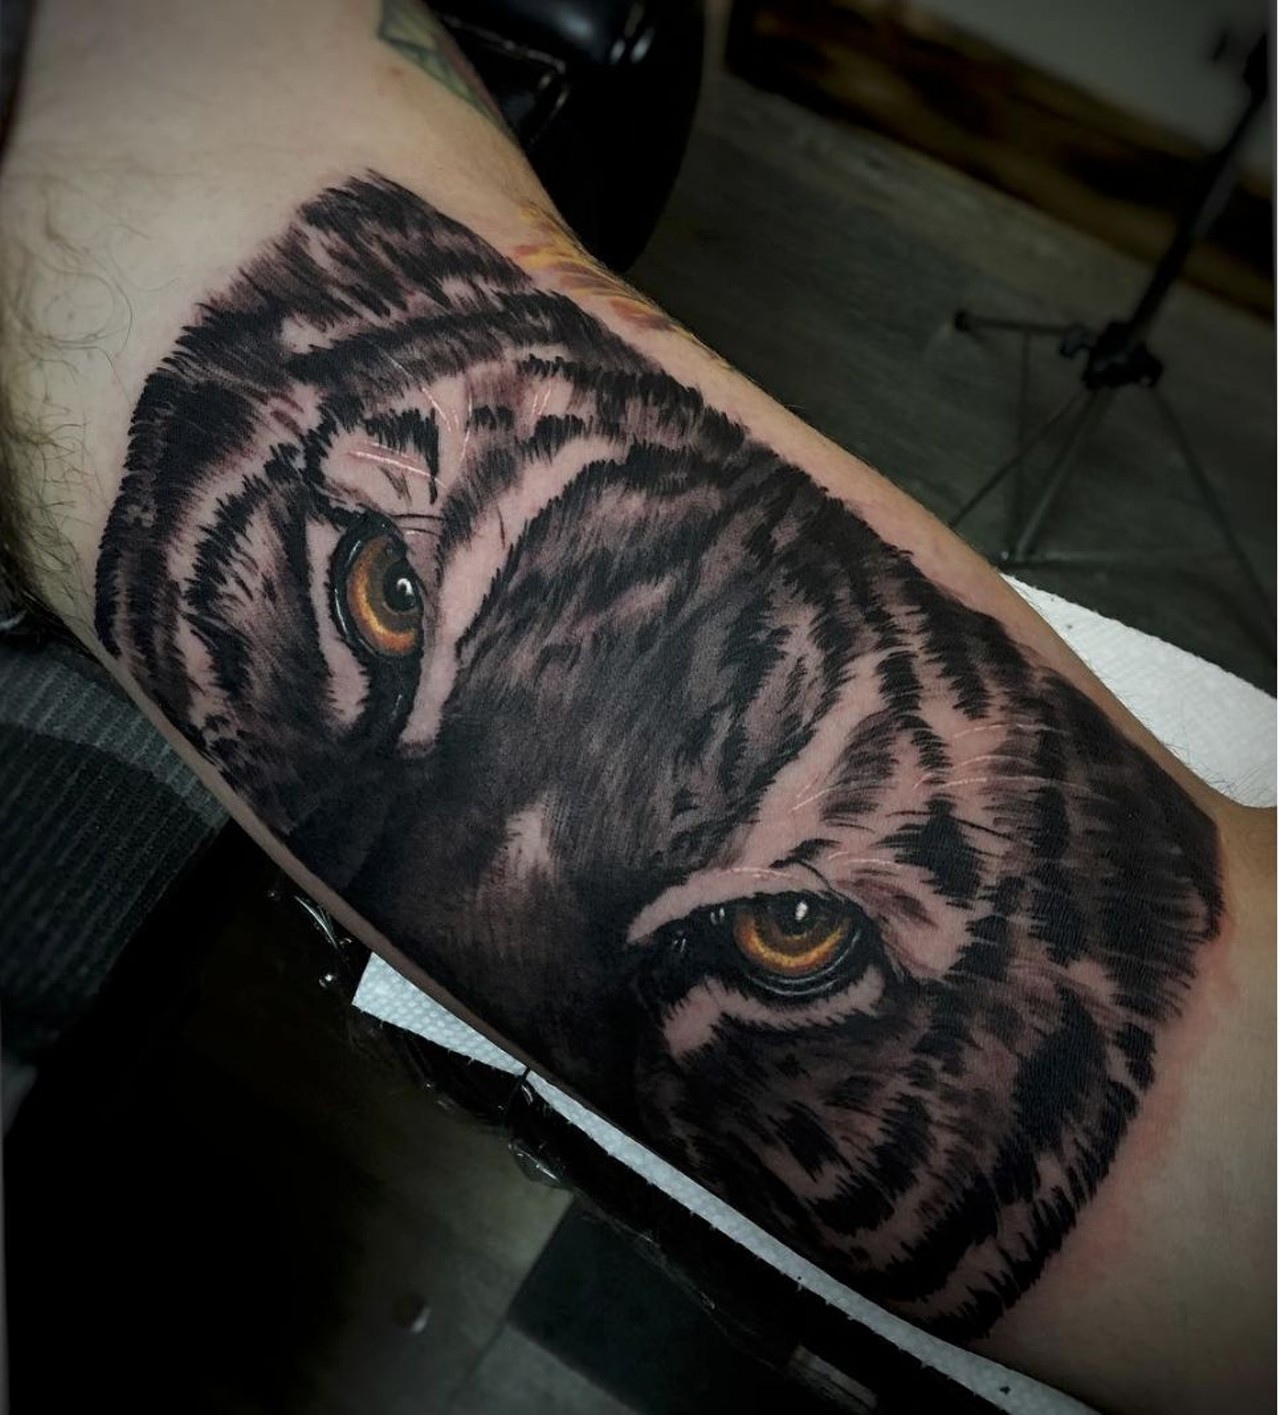  Get Tatted Up
Everlast Tattoo Company, 7276 Jackson St., Mentor
Don&#146;t lie, everyone has that one tattoo that they&#146;d always had in mind. If you&#146;re actually going to do it, now&#146;s the time. Not like it&#146;s permanent or anything.
Photo via @MikeD_Tattoos/Instagram